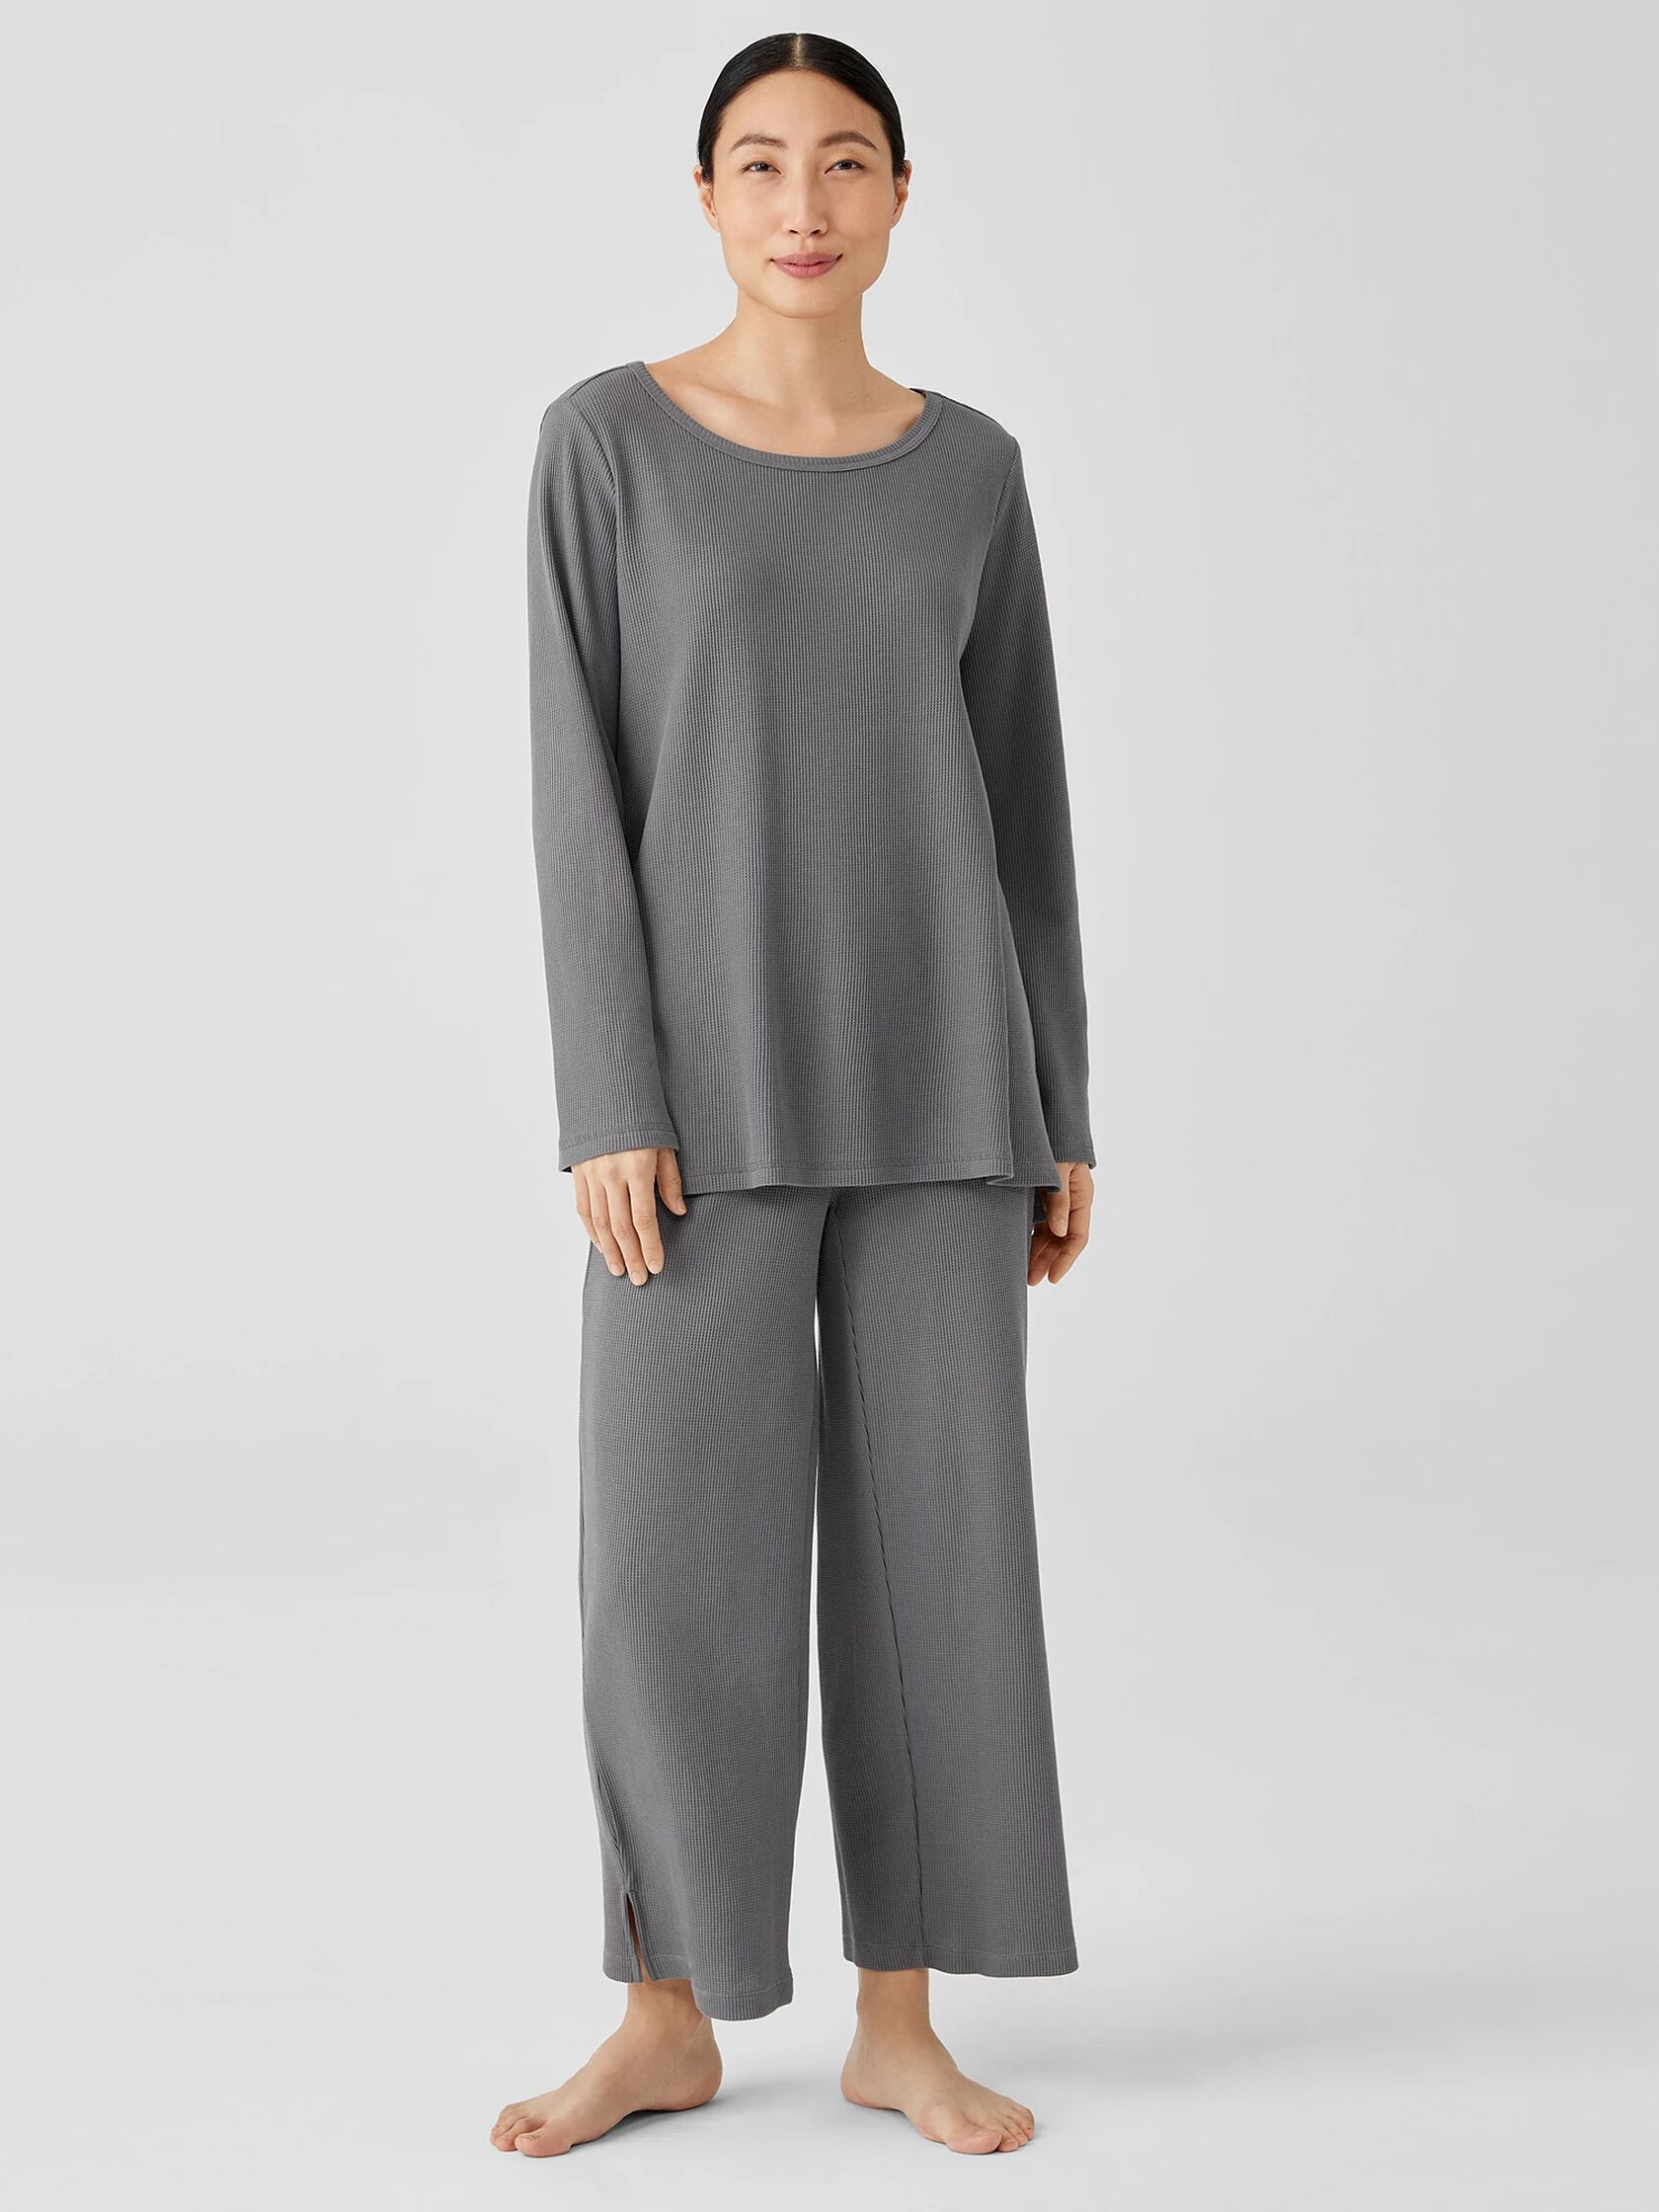 Cozy Organic Cotton Thermal Bateau Neck Top | EILEEN FISHER